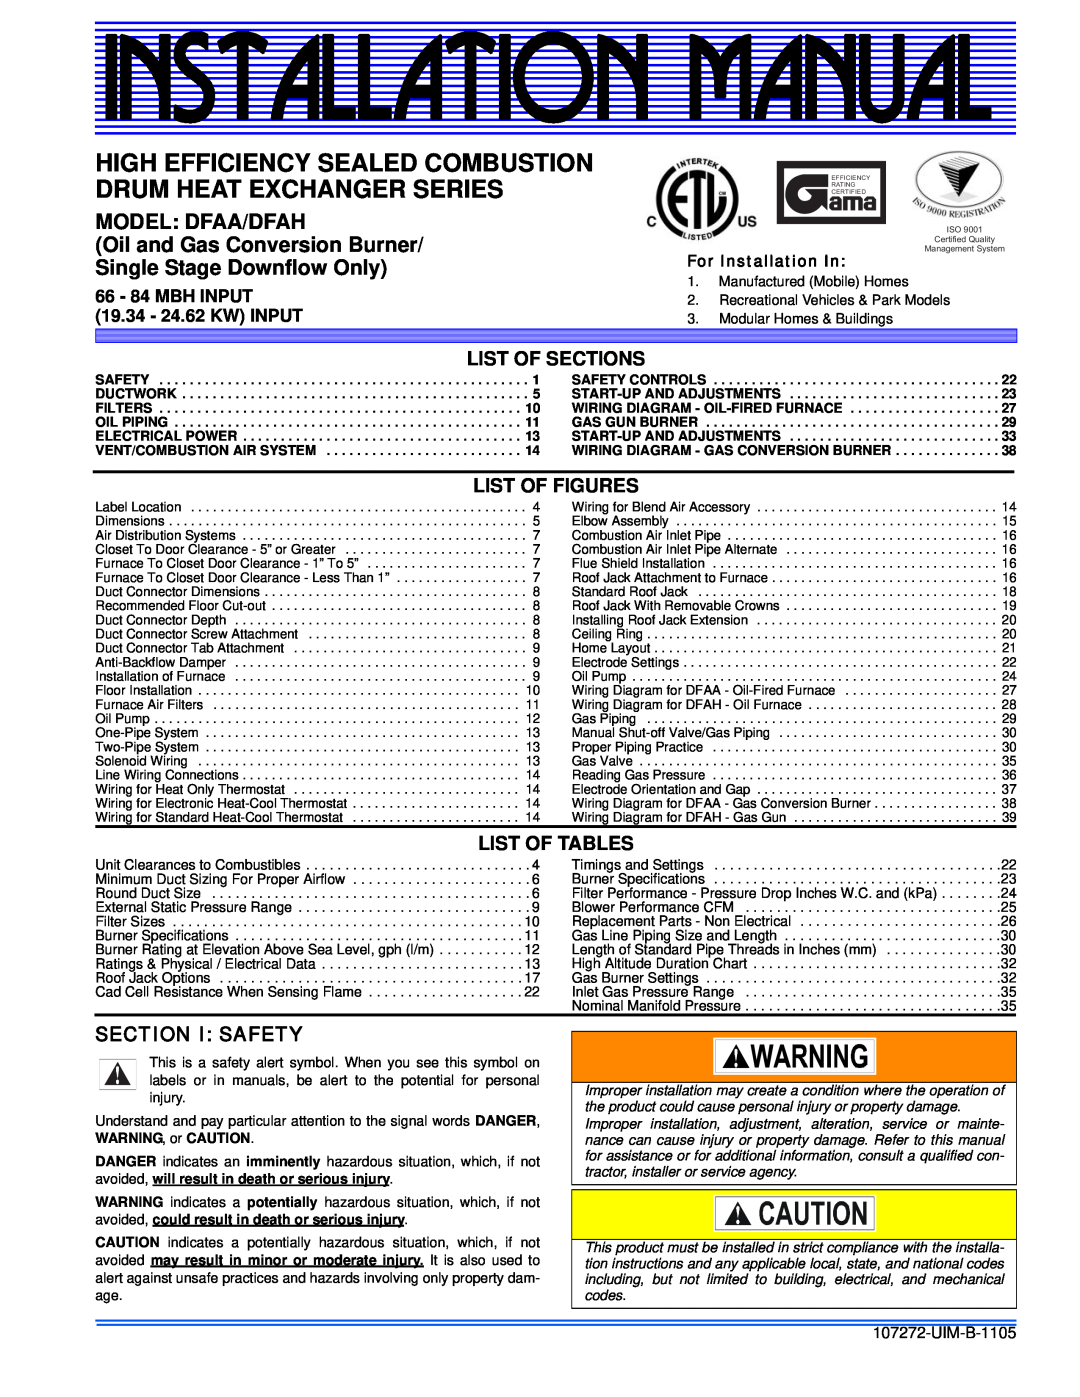 York DFAA installation manual List Of Sections, List Of Figures, List Of Tables, Section I: Safety, For Installation In 